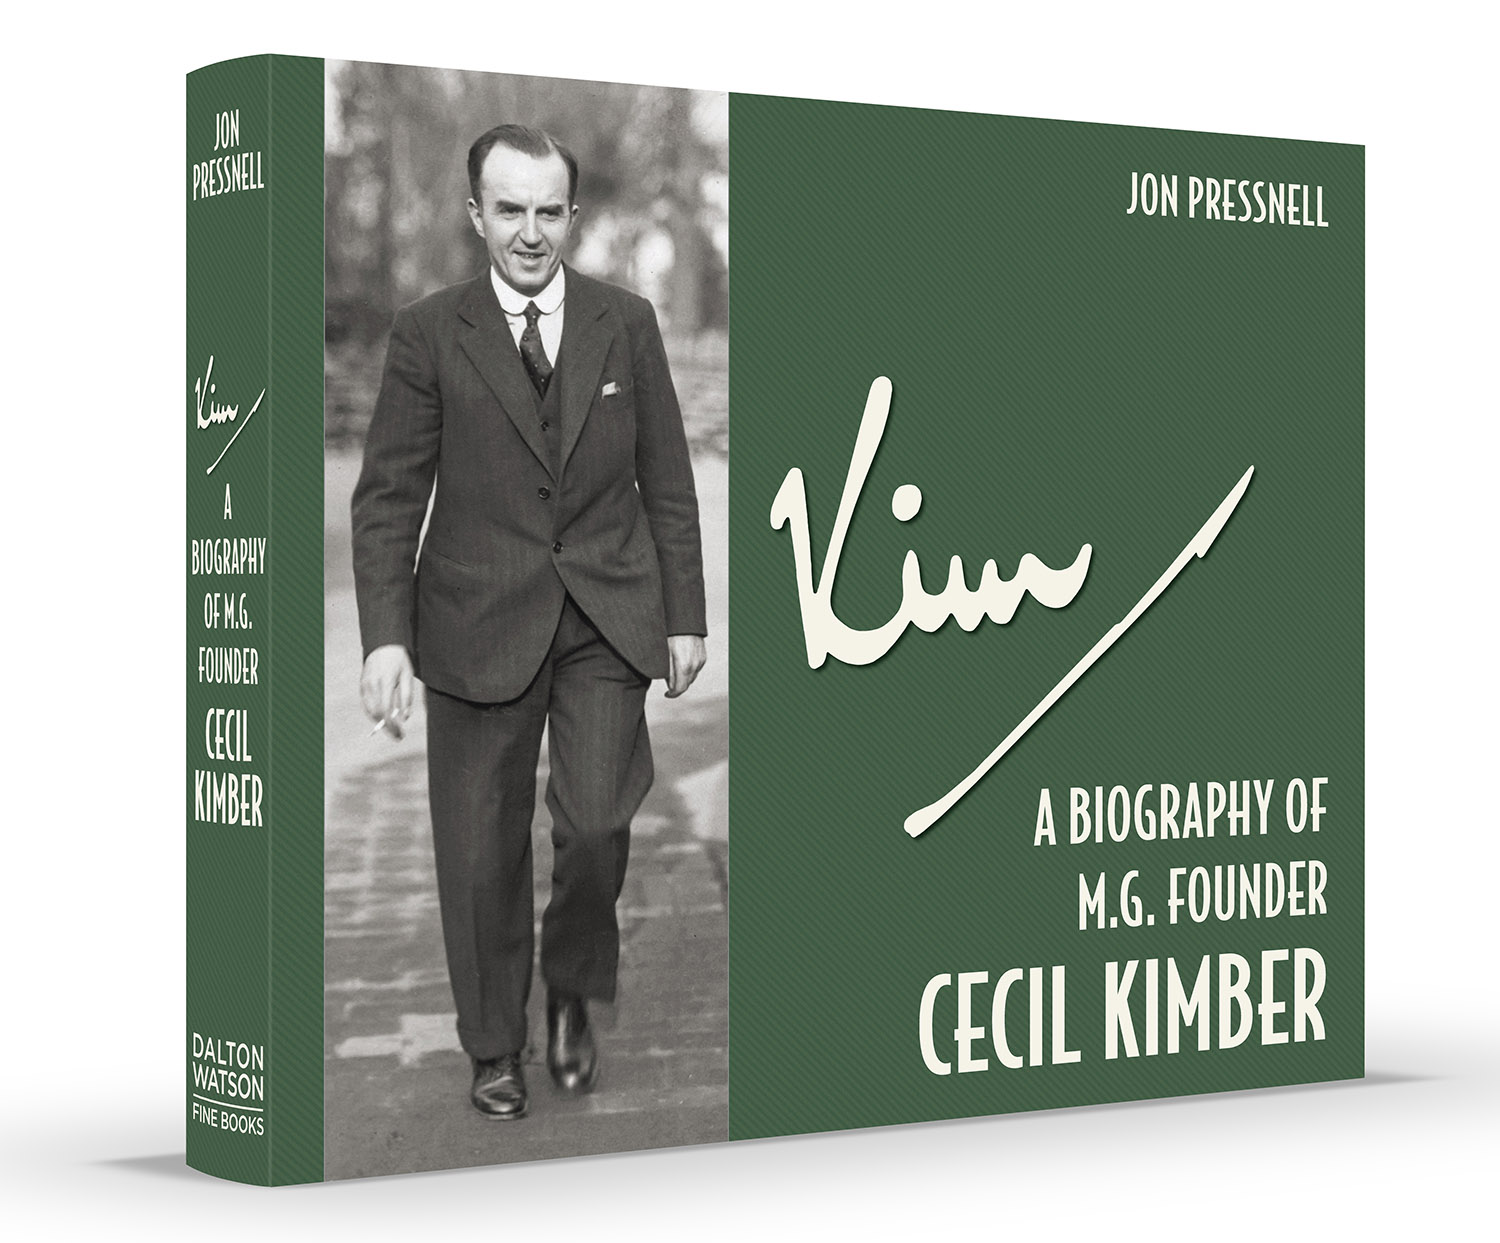 Pressnell shows a lot of primary sources, and also quotes extensively from several foundational texts such as, especially, The Cecil Kimber Centenary Book and MG by McComb.